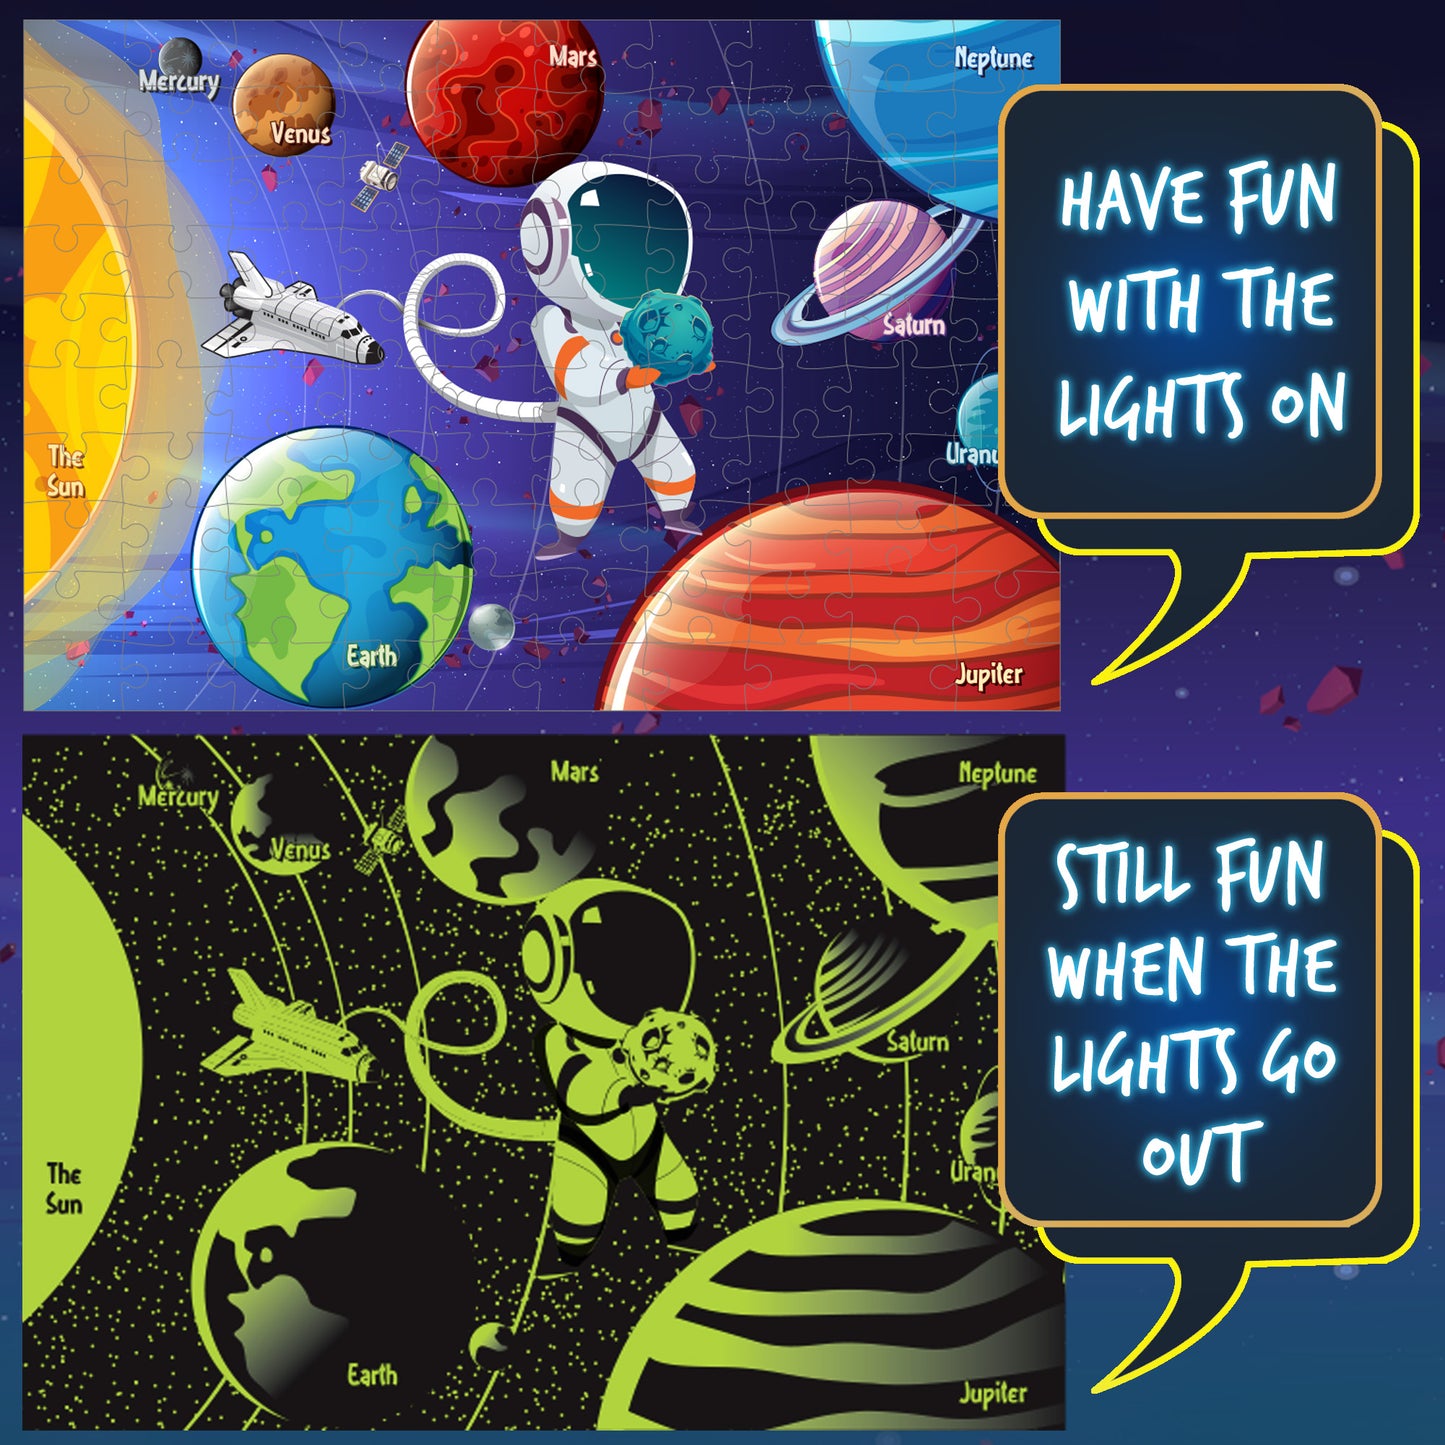 Glow in the Dark - Solar System Puzzle